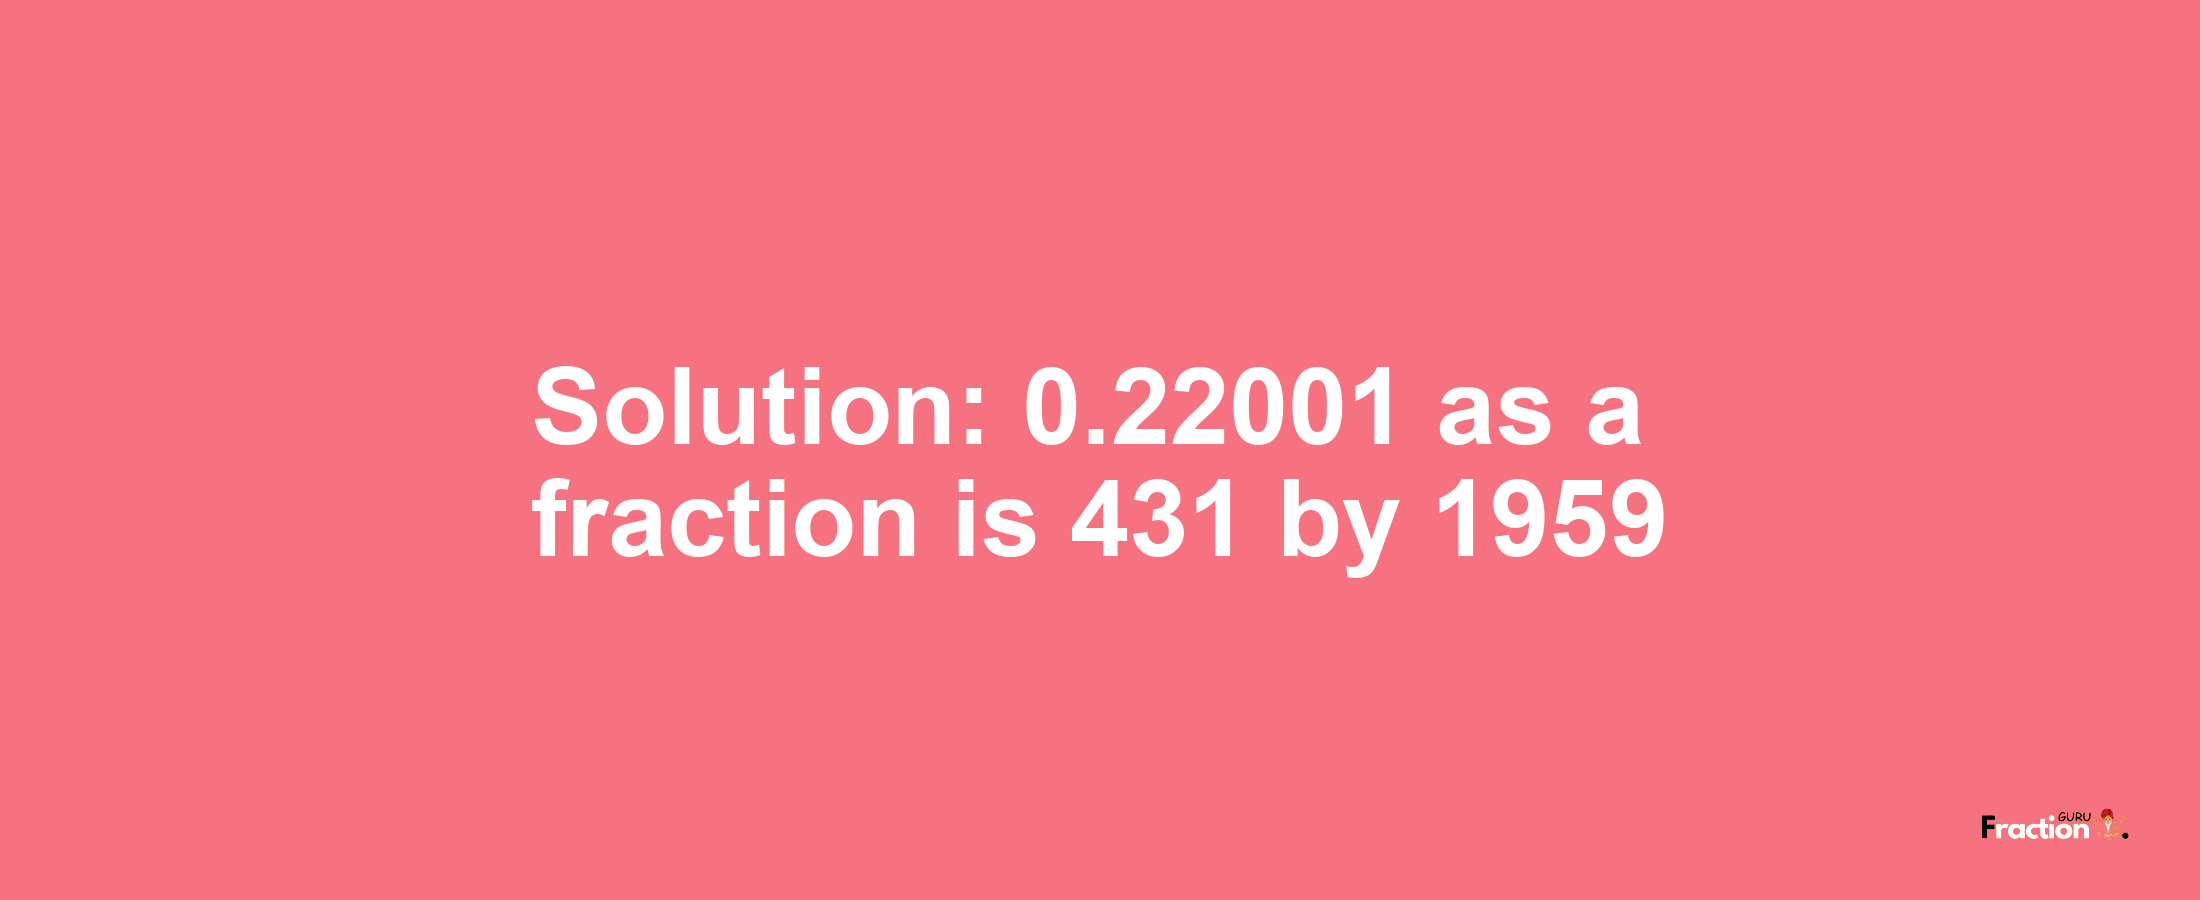 Solution:0.22001 as a fraction is 431/1959